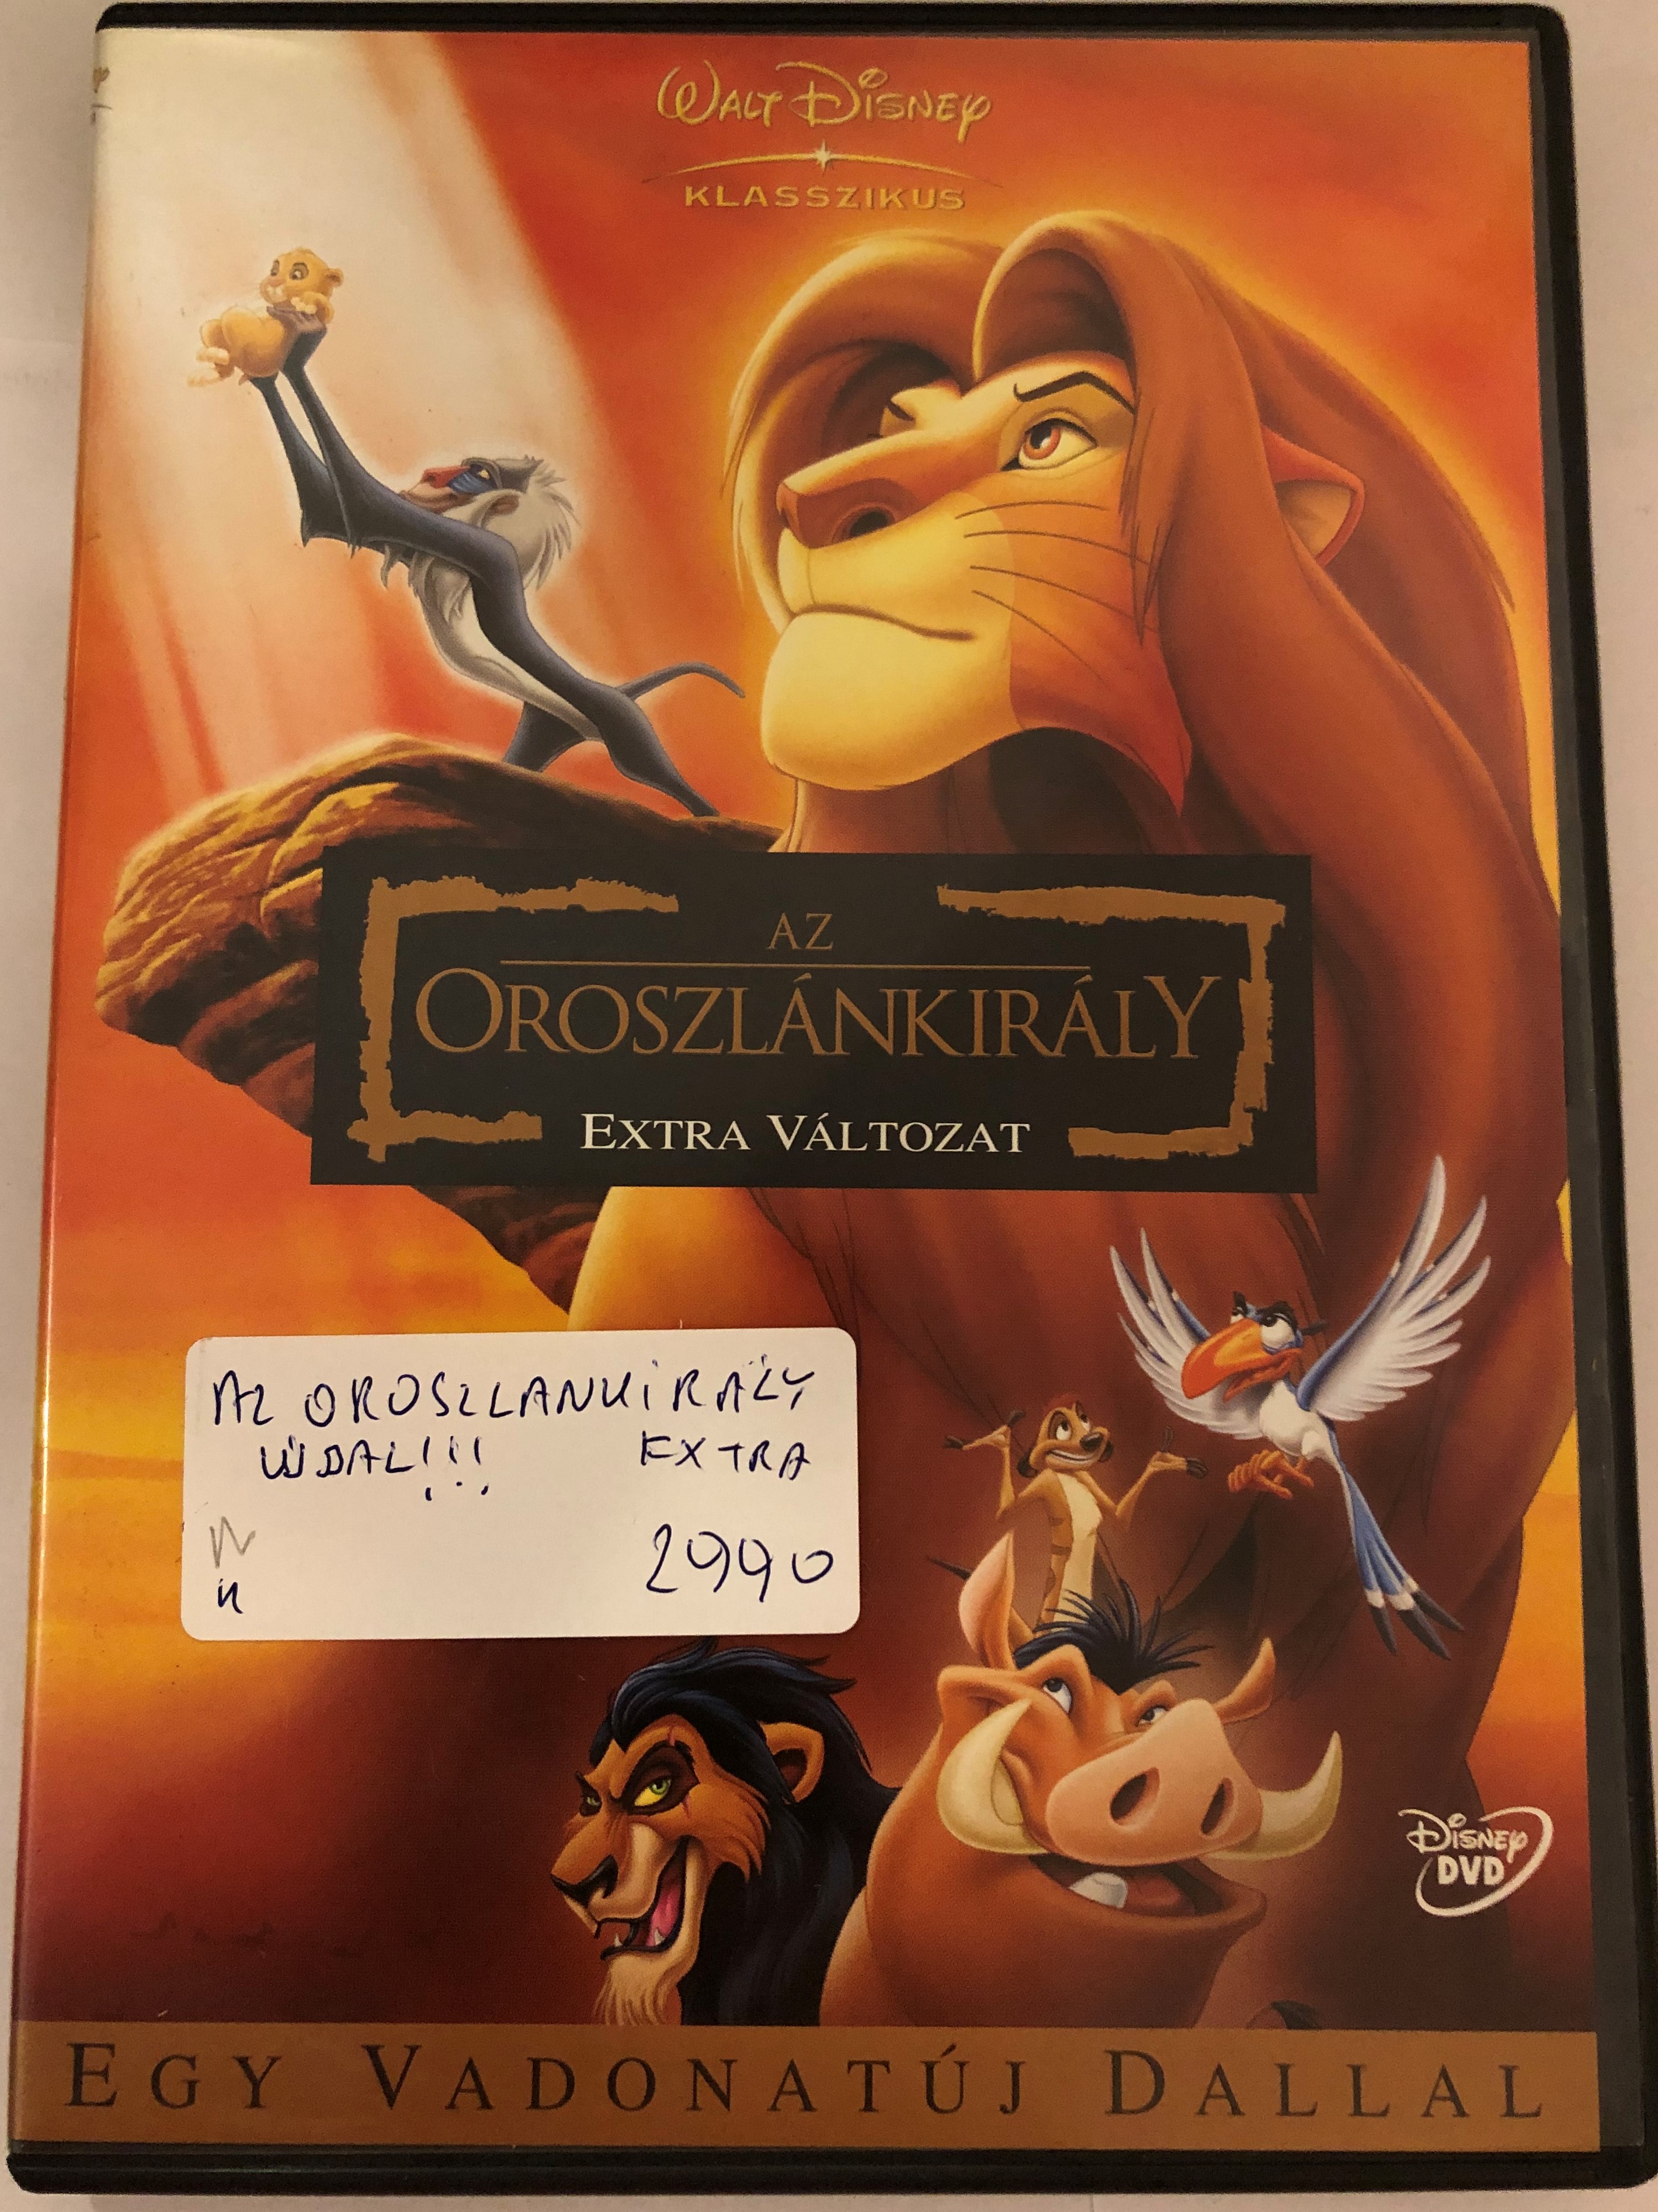 the-lion-king-hungarian-special-edition-dvd-1994-az-oroszl-nkir-ly-directed-by-roger-allers-rob-minkoff-1.jpg